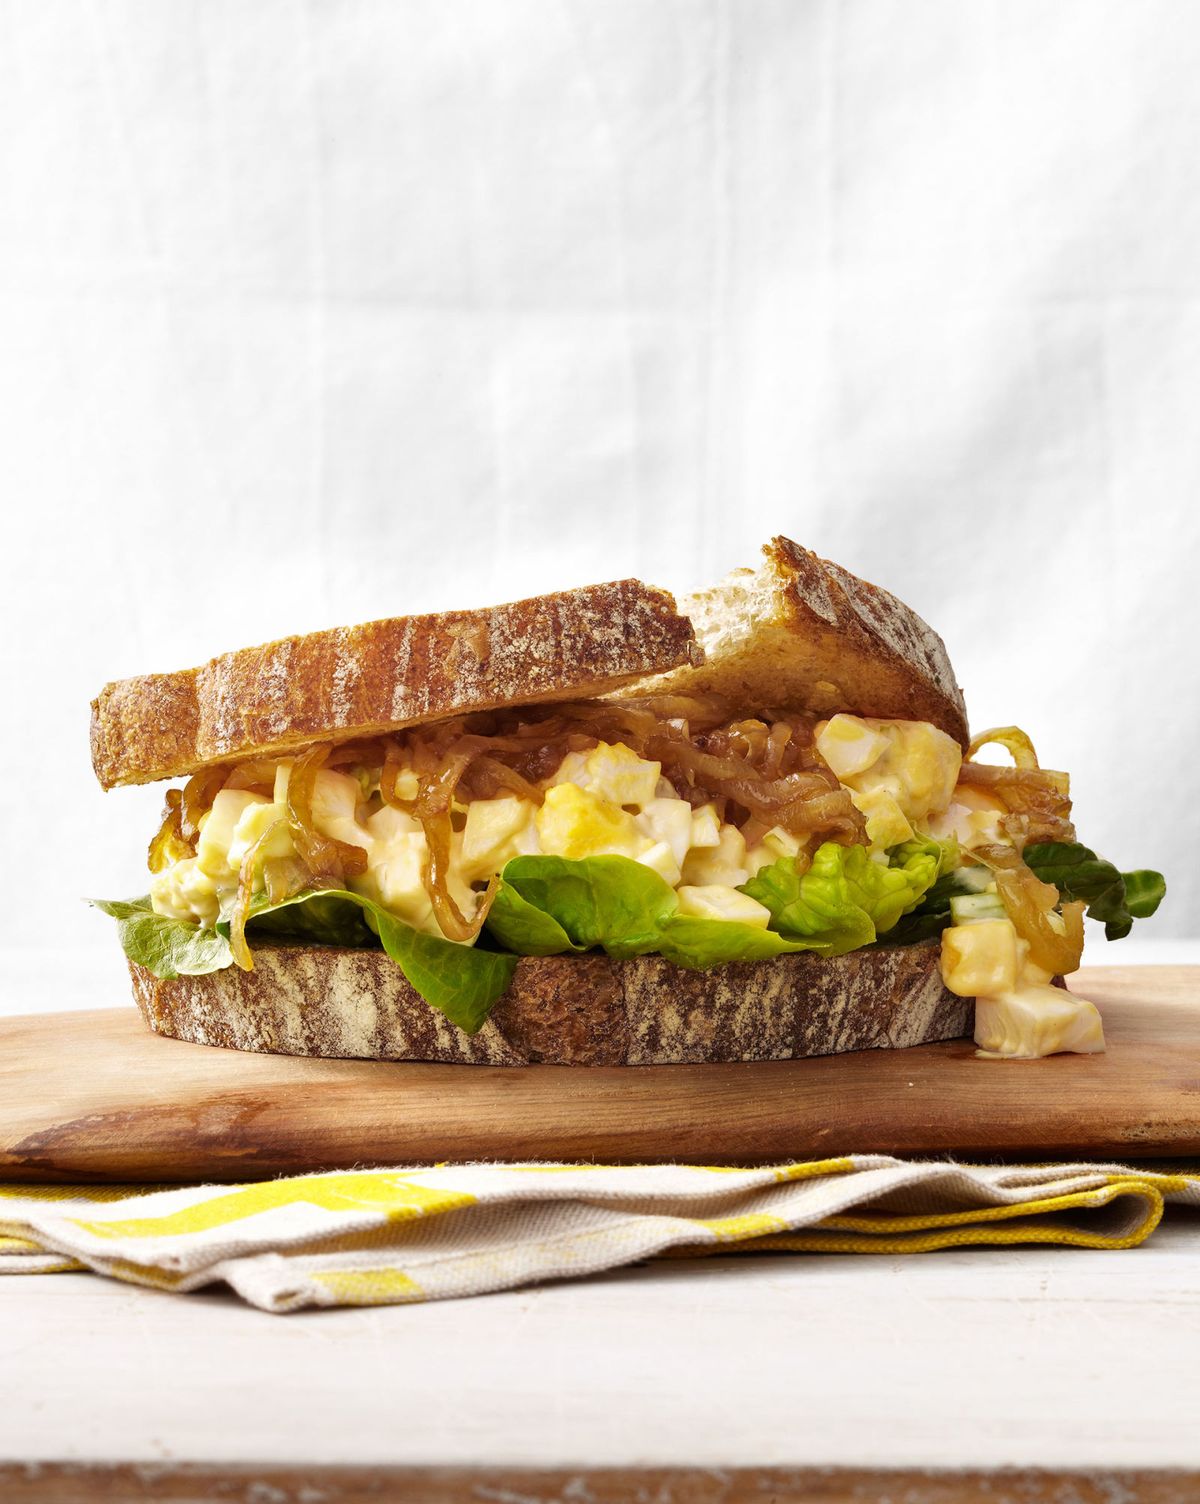 egg salad and caramelized onion sandwiches